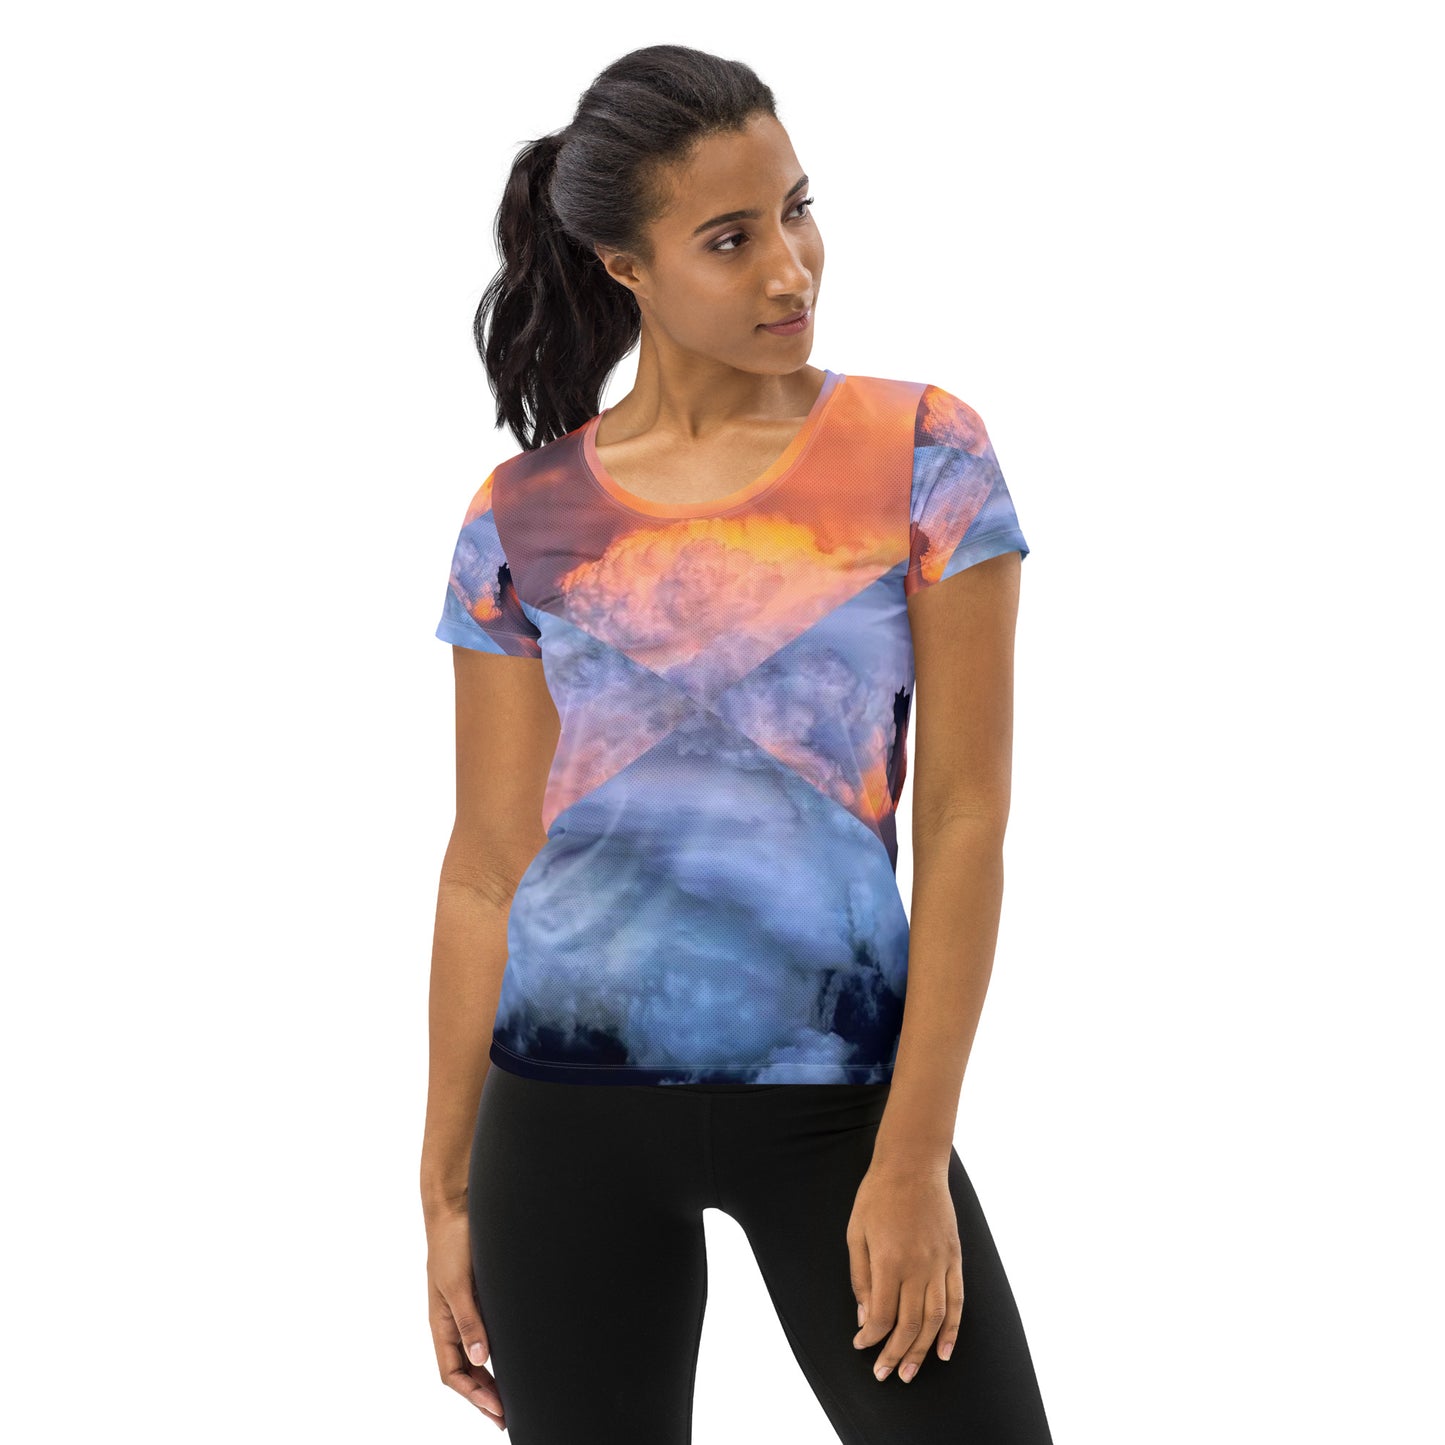 number9ine TRANSFERENCE (2) All-Over Print Women's Athletic T-shirt